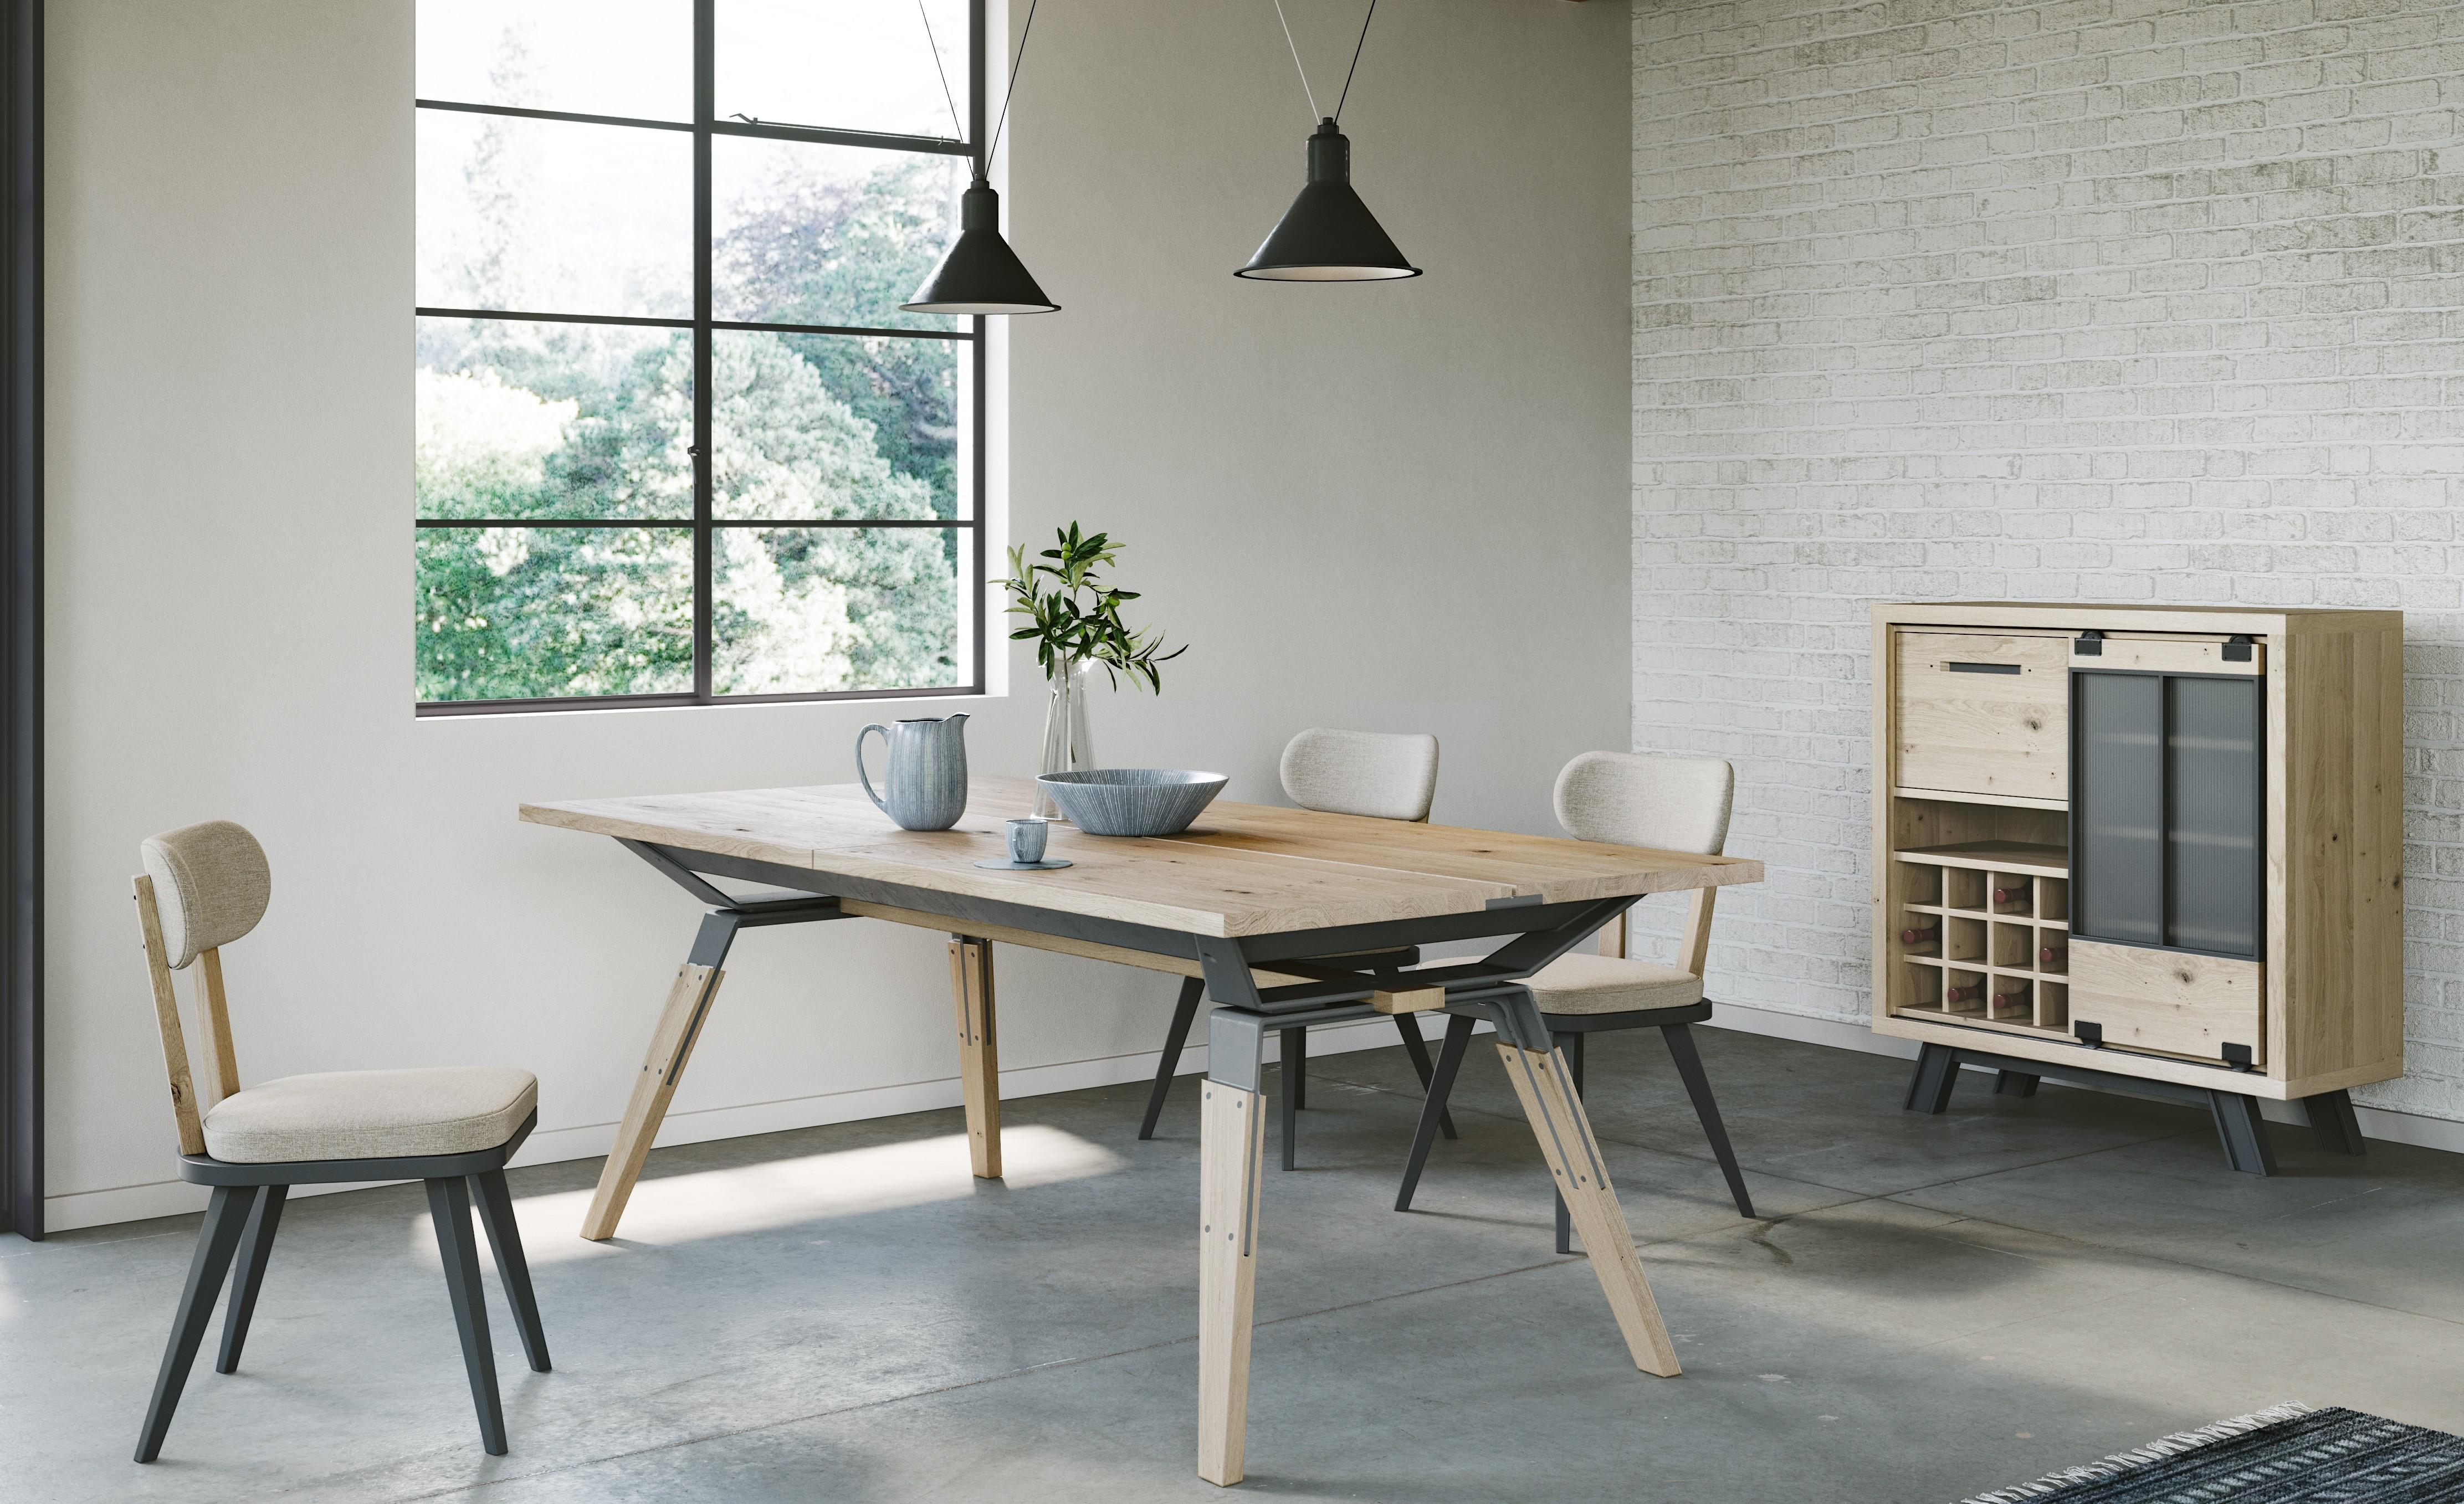 The ST James collection incorporates glass and metel details in its furniture pieces that give them a sober and industrial look without compromising their versatility.

Produced by Cacio with more than 70 years of know how, this piece is made to